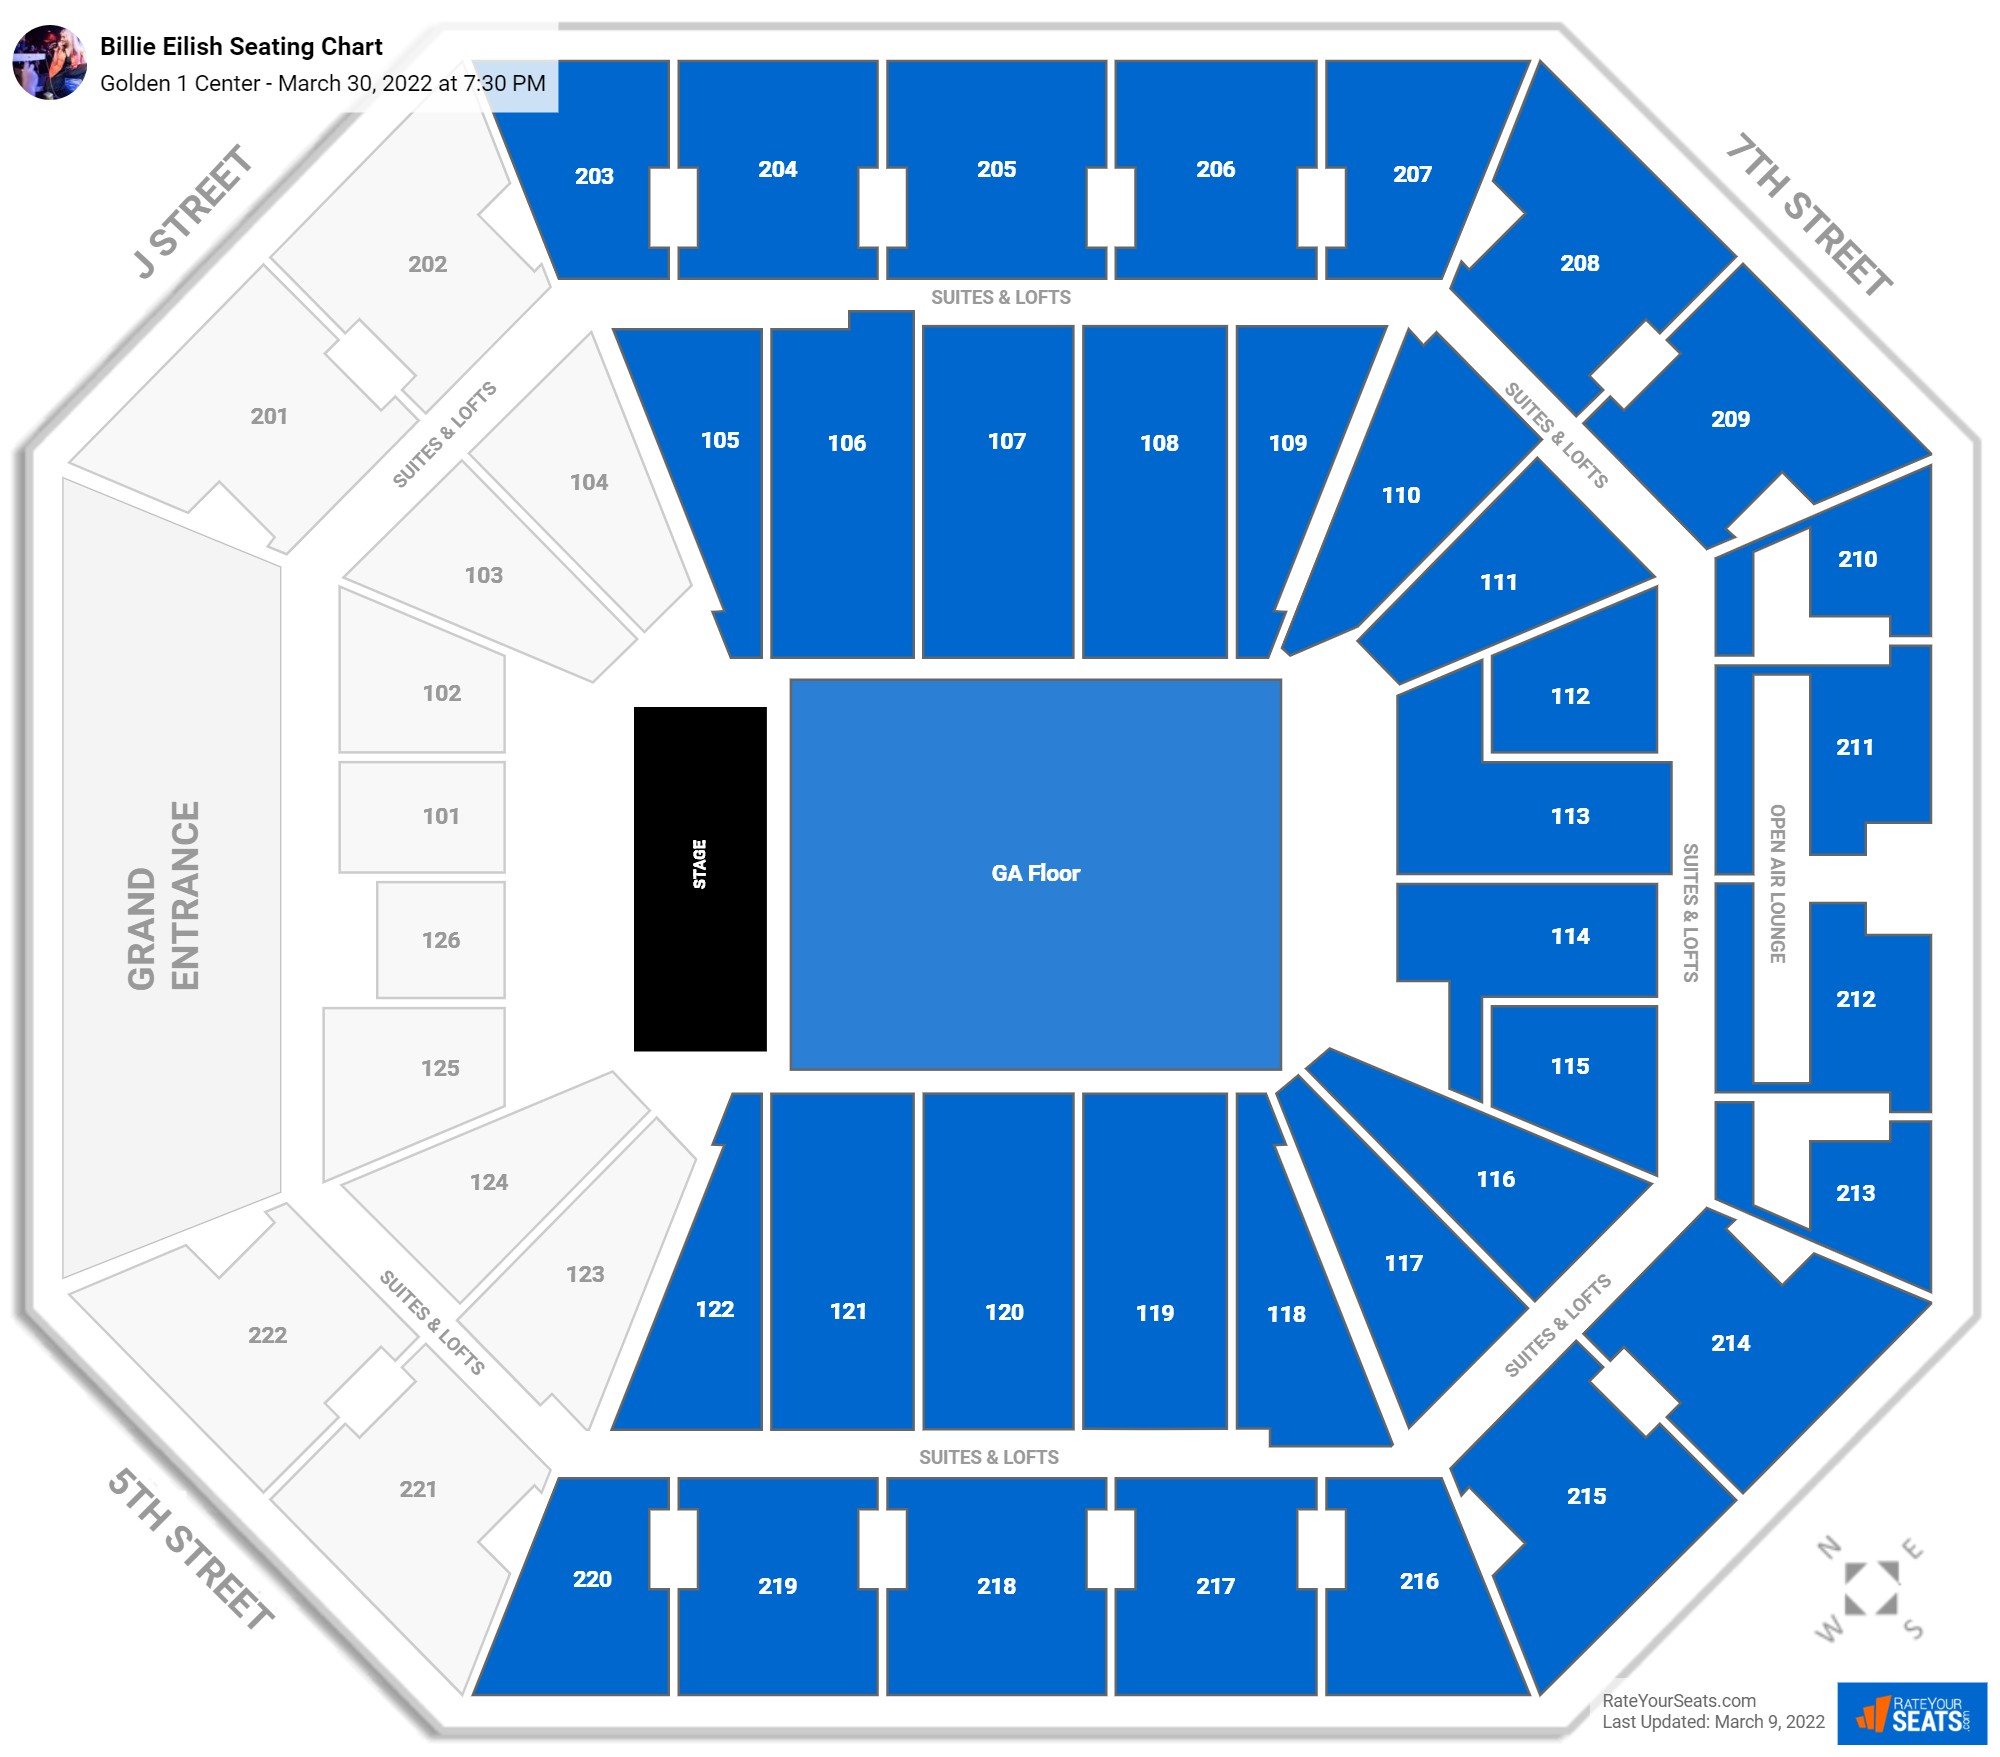 Golden 1 Center Seating Charts for Concerts